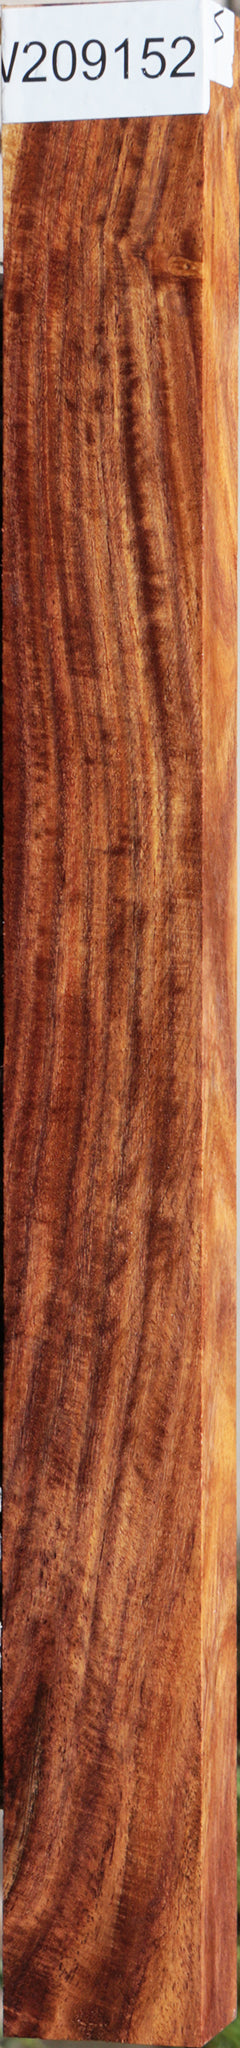 Extra Fancy East Indian Rosewood Lumber